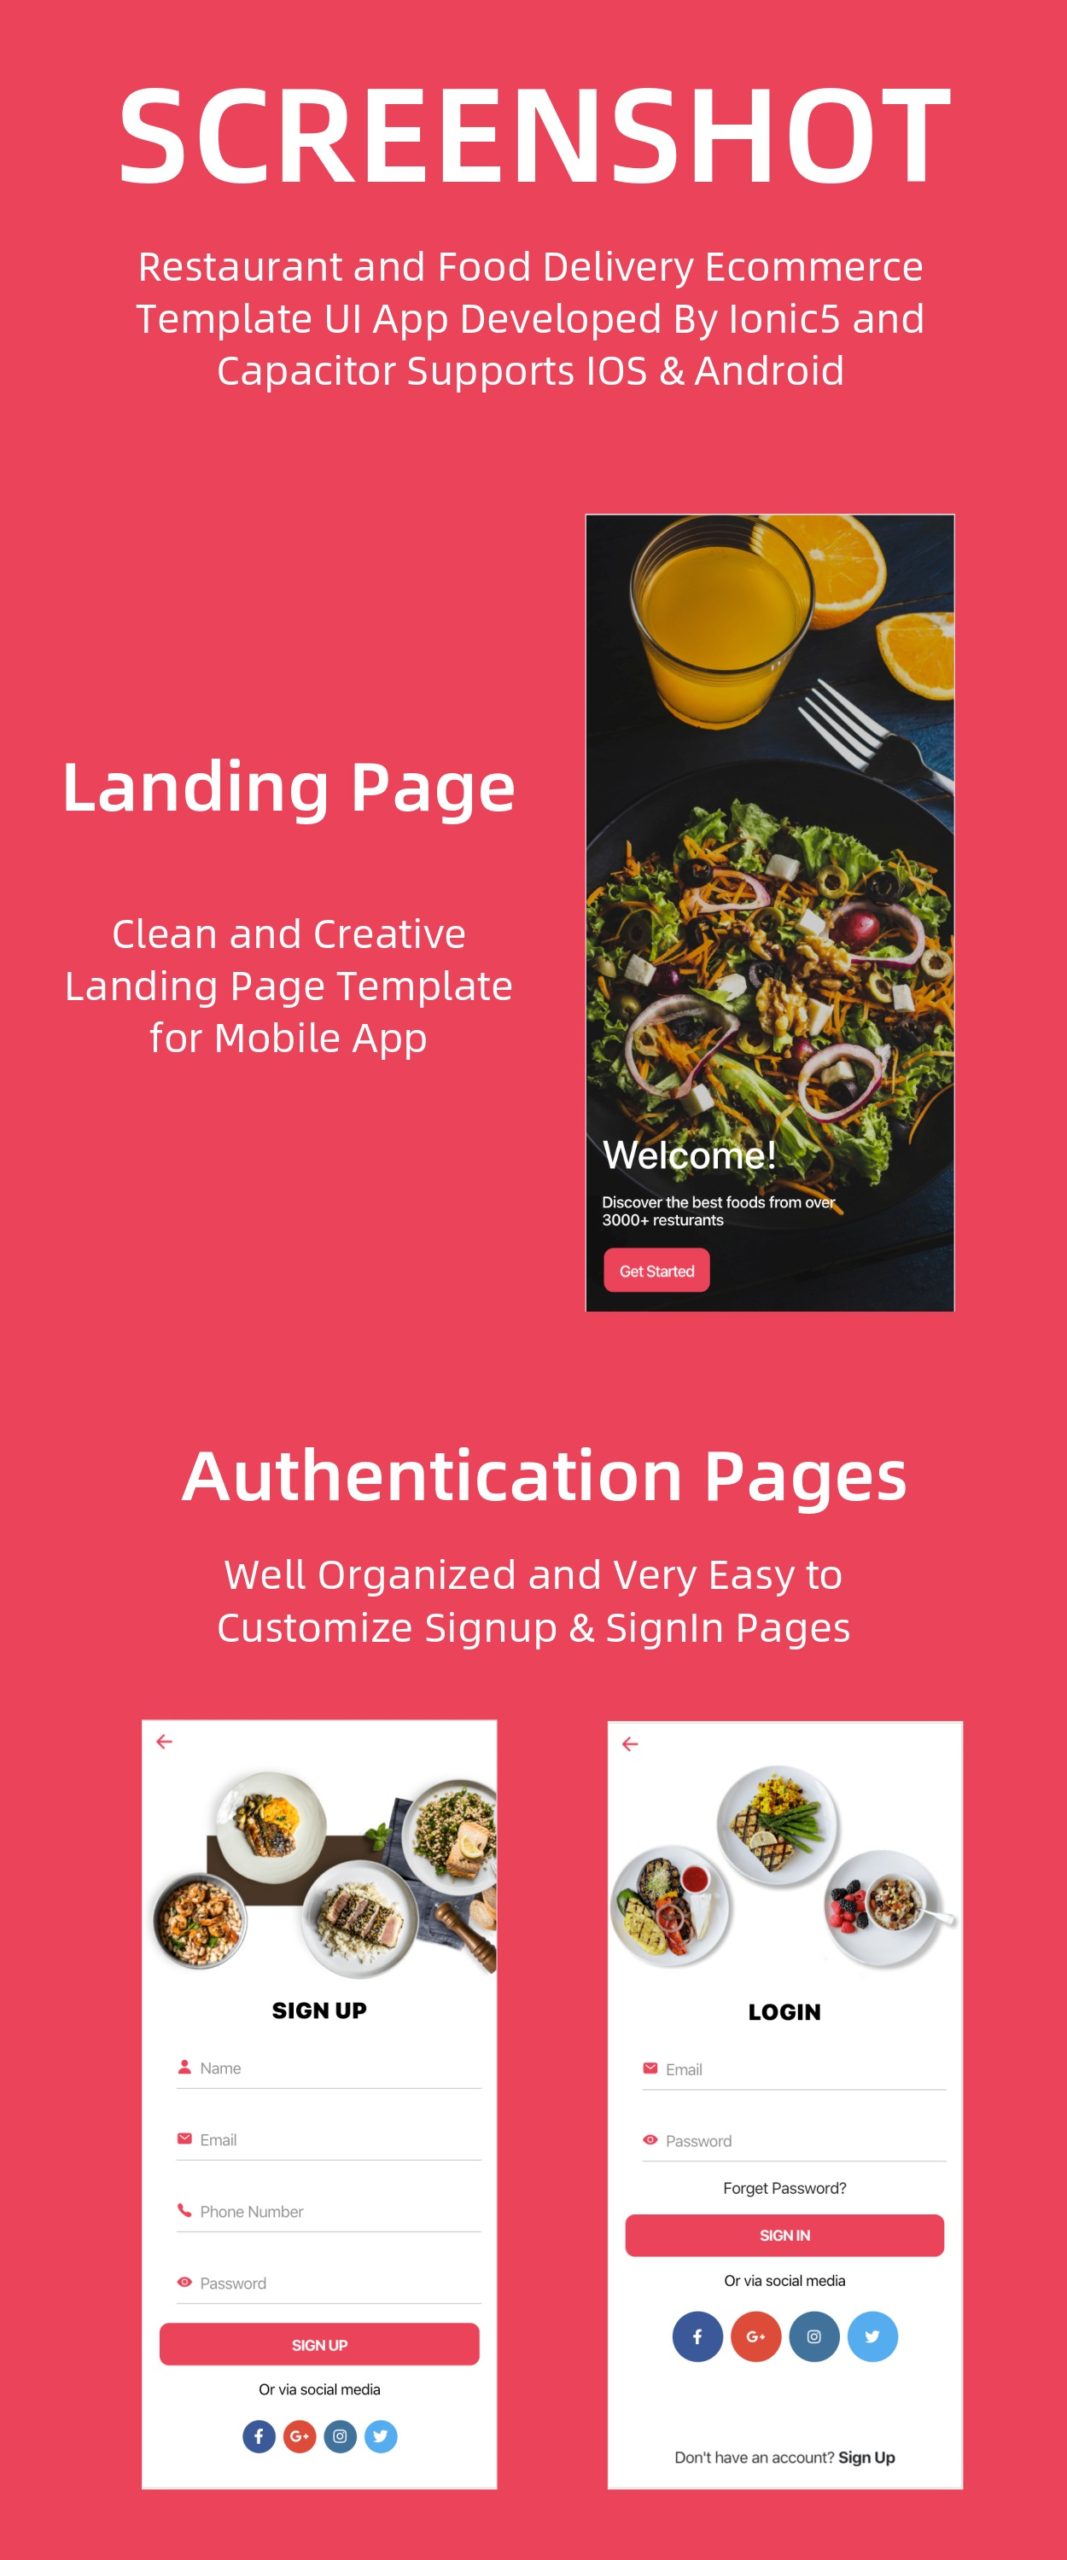 Restaurant and Food Delivery Ecommerce App (Ionic5 & Capacitor) Template UI - 5